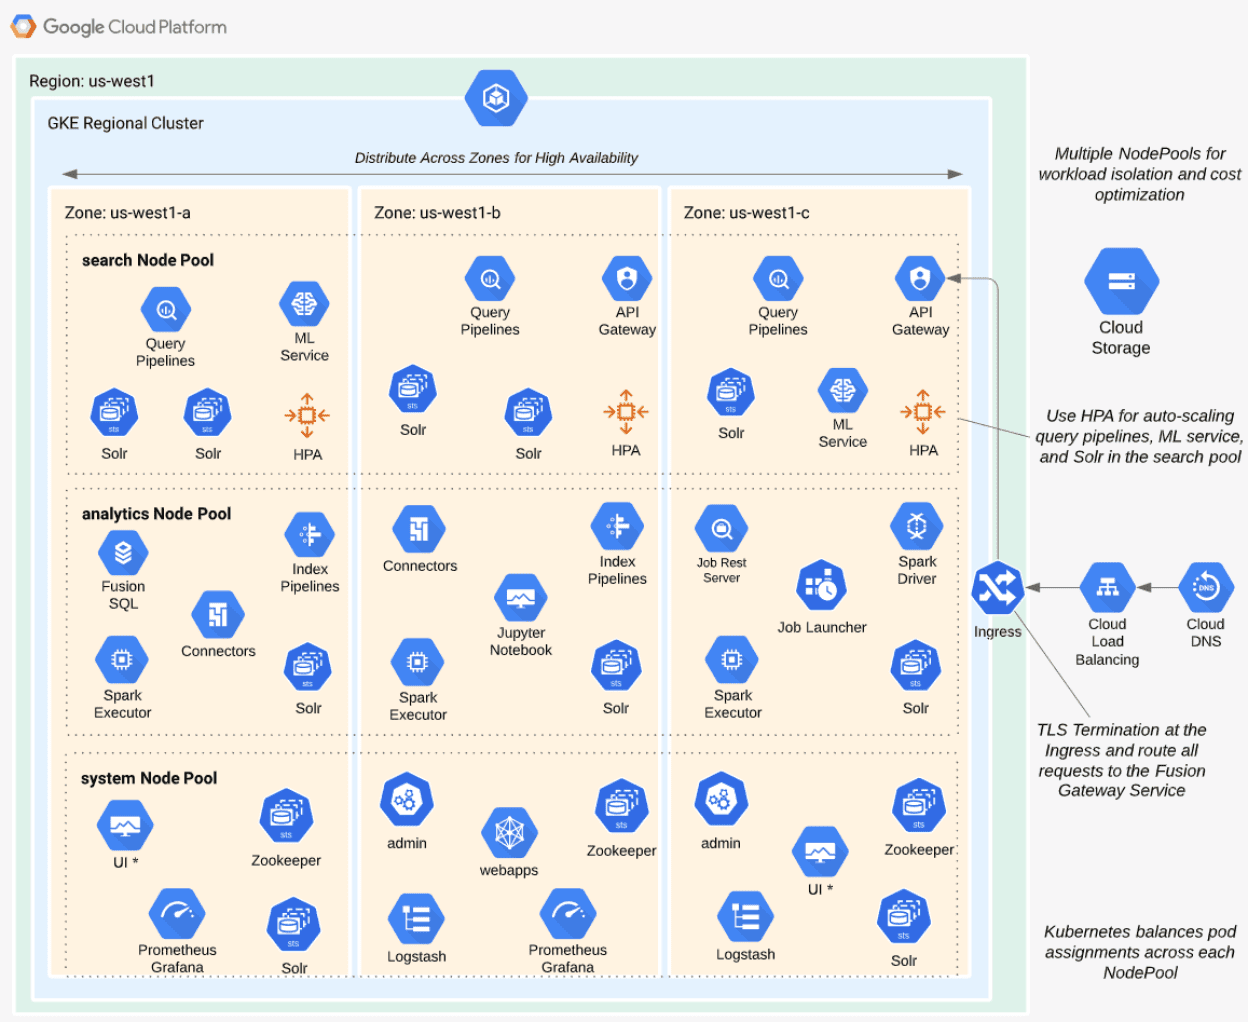 Fusion 5 running in Google Kubernetes Engine (GKE) with multiple node pools for workload isolation